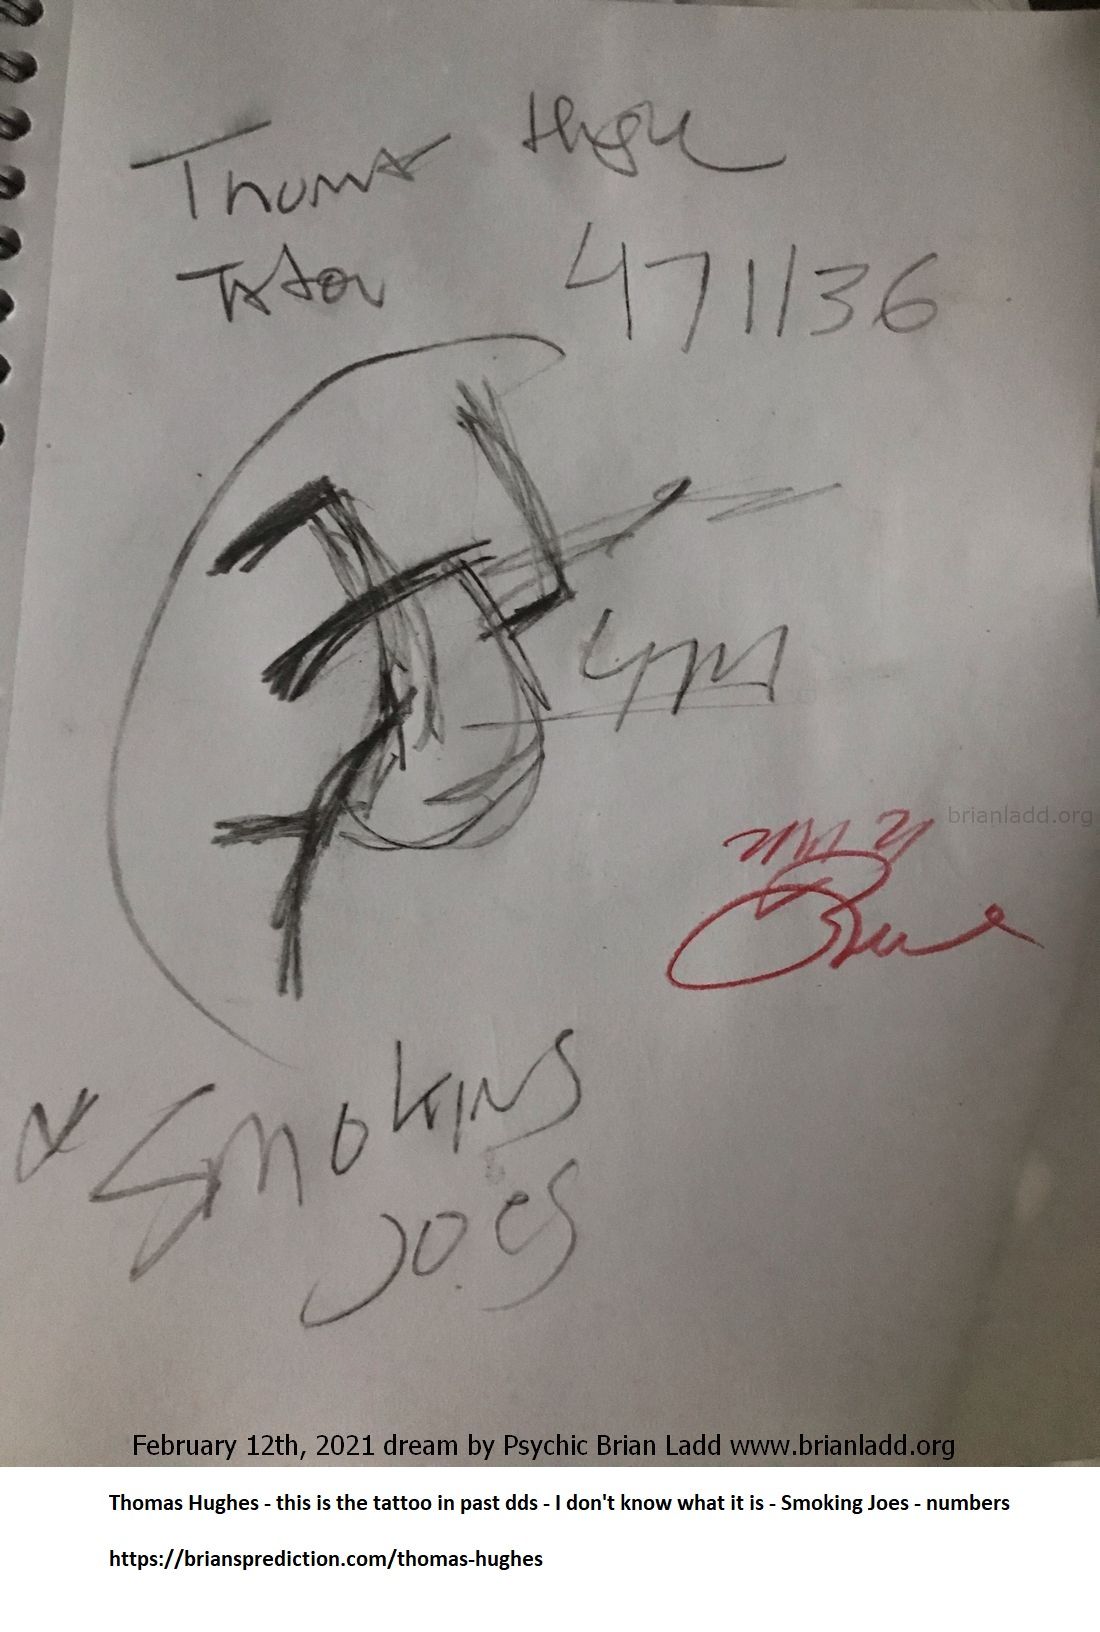 14448 12 February 2021 2 - Thomas Hughes - This Is The Tattoo In Past Dds - I Don'T Know What It Is - Smokin Joes -...
Thomas Hughes - This Is The Tattoo In Past Dds - I Don'T Know What It Is - Smokin Joes - Numbers   https://briansprediction.com/Thomas-Hughes
